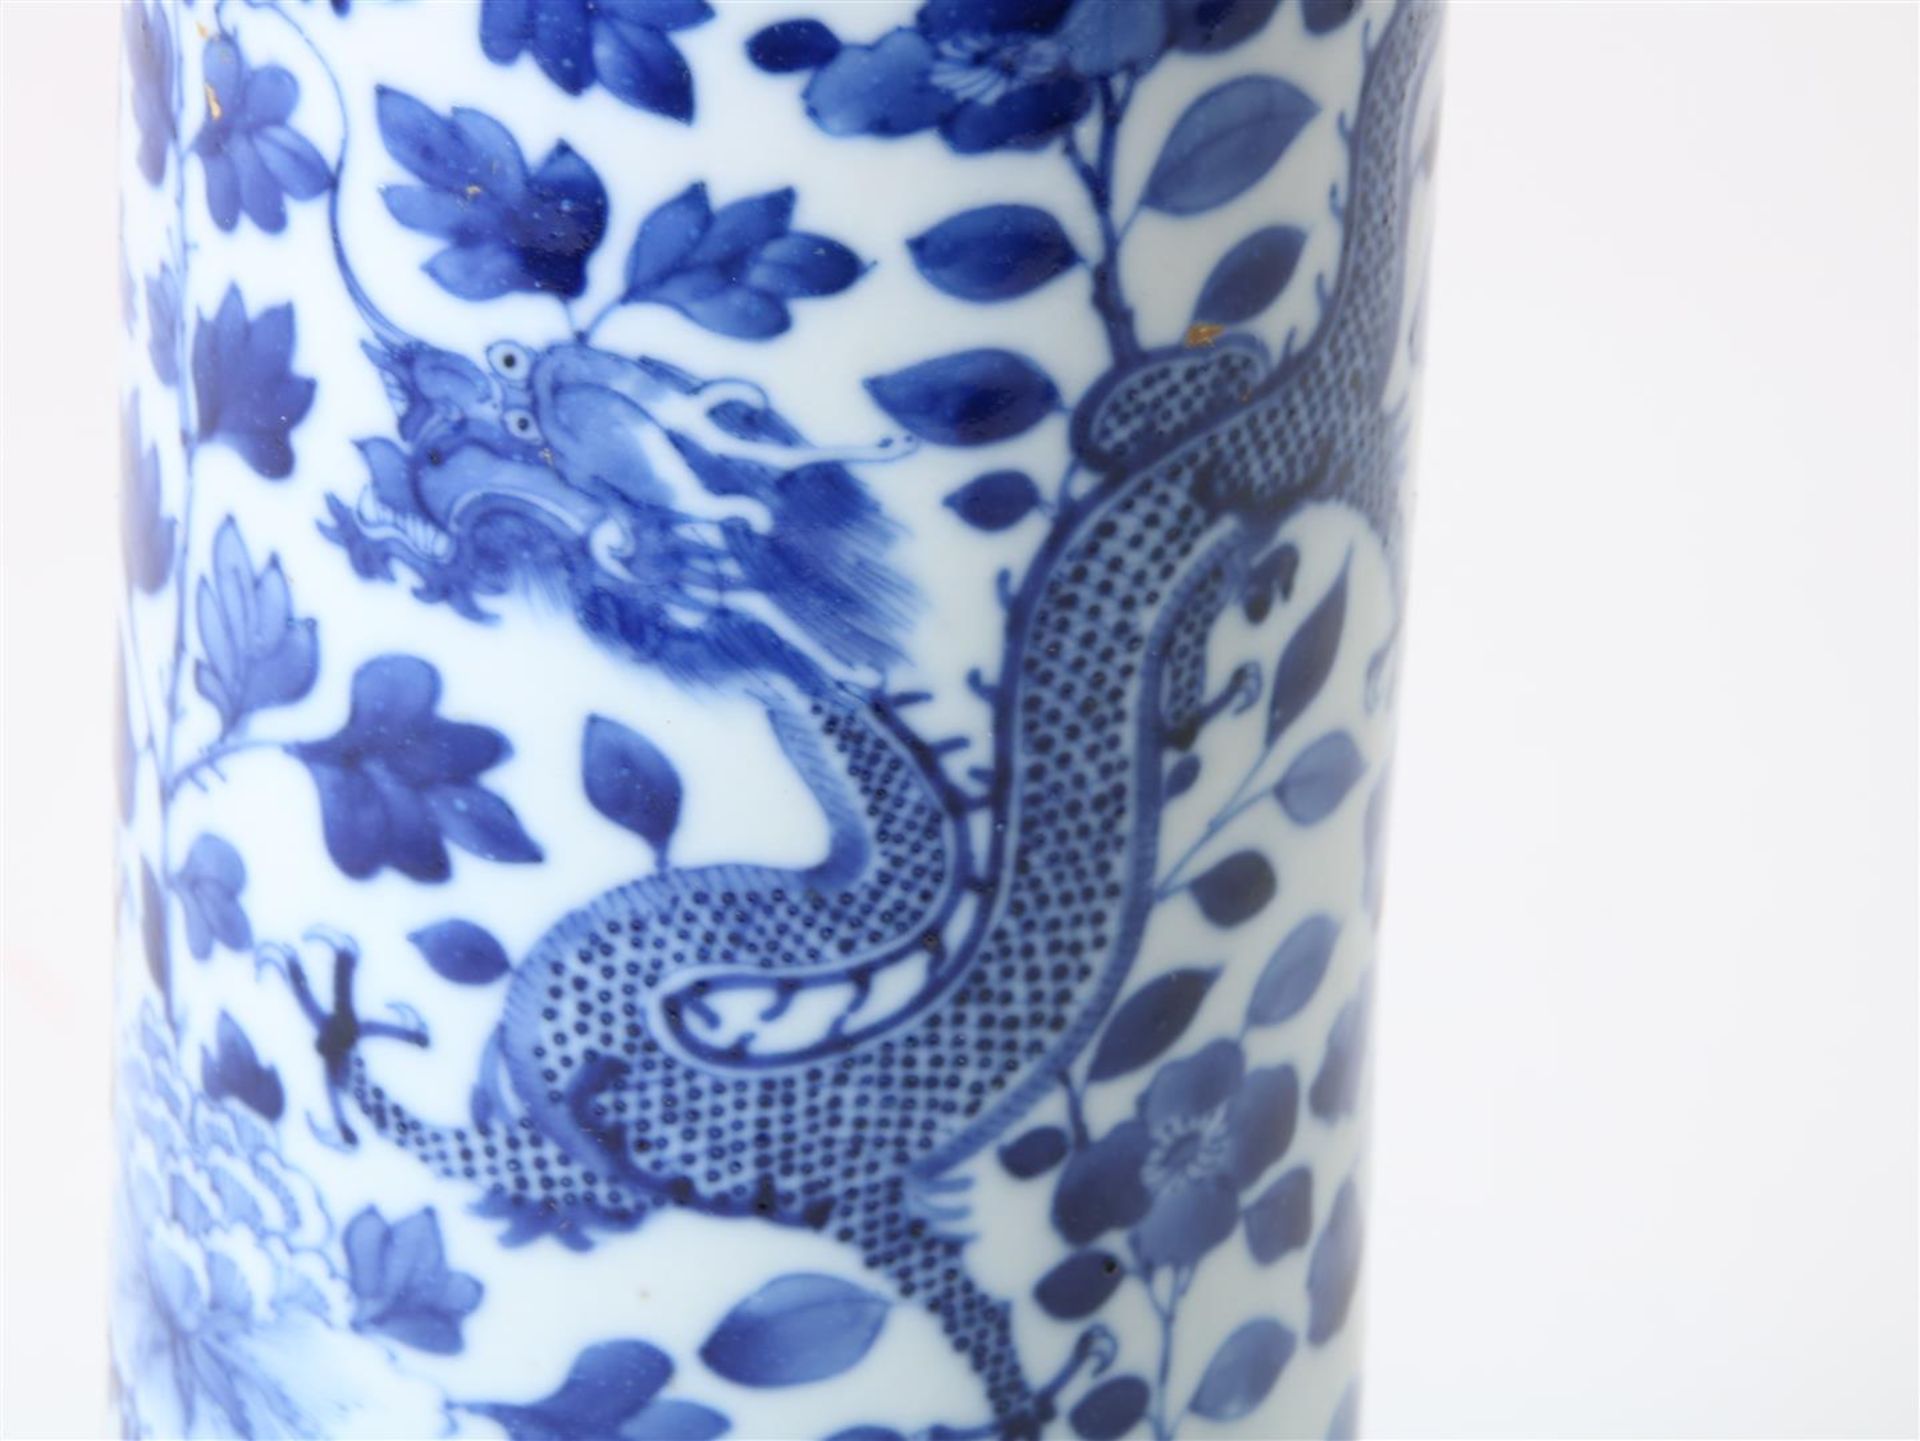 Porcelain 4-clawed dragon rouleau vase blue decorated flowers and leaves, China 19th century, marked - Image 2 of 3